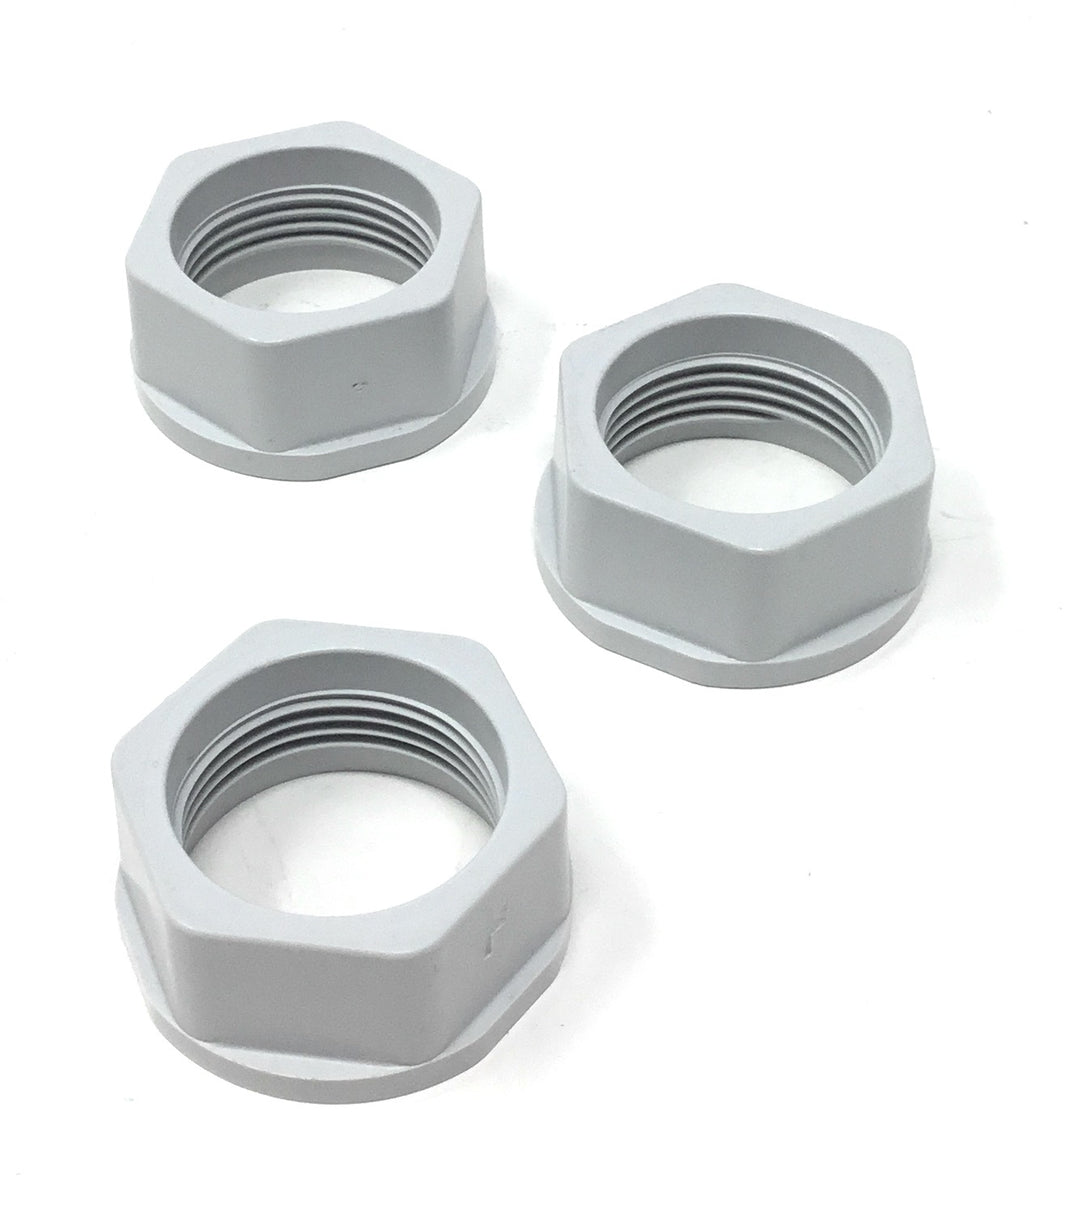 Front View - Hayward TriVac 700/500 Mender Nut Kit - Gray - 3 Pack - ePoolSupply